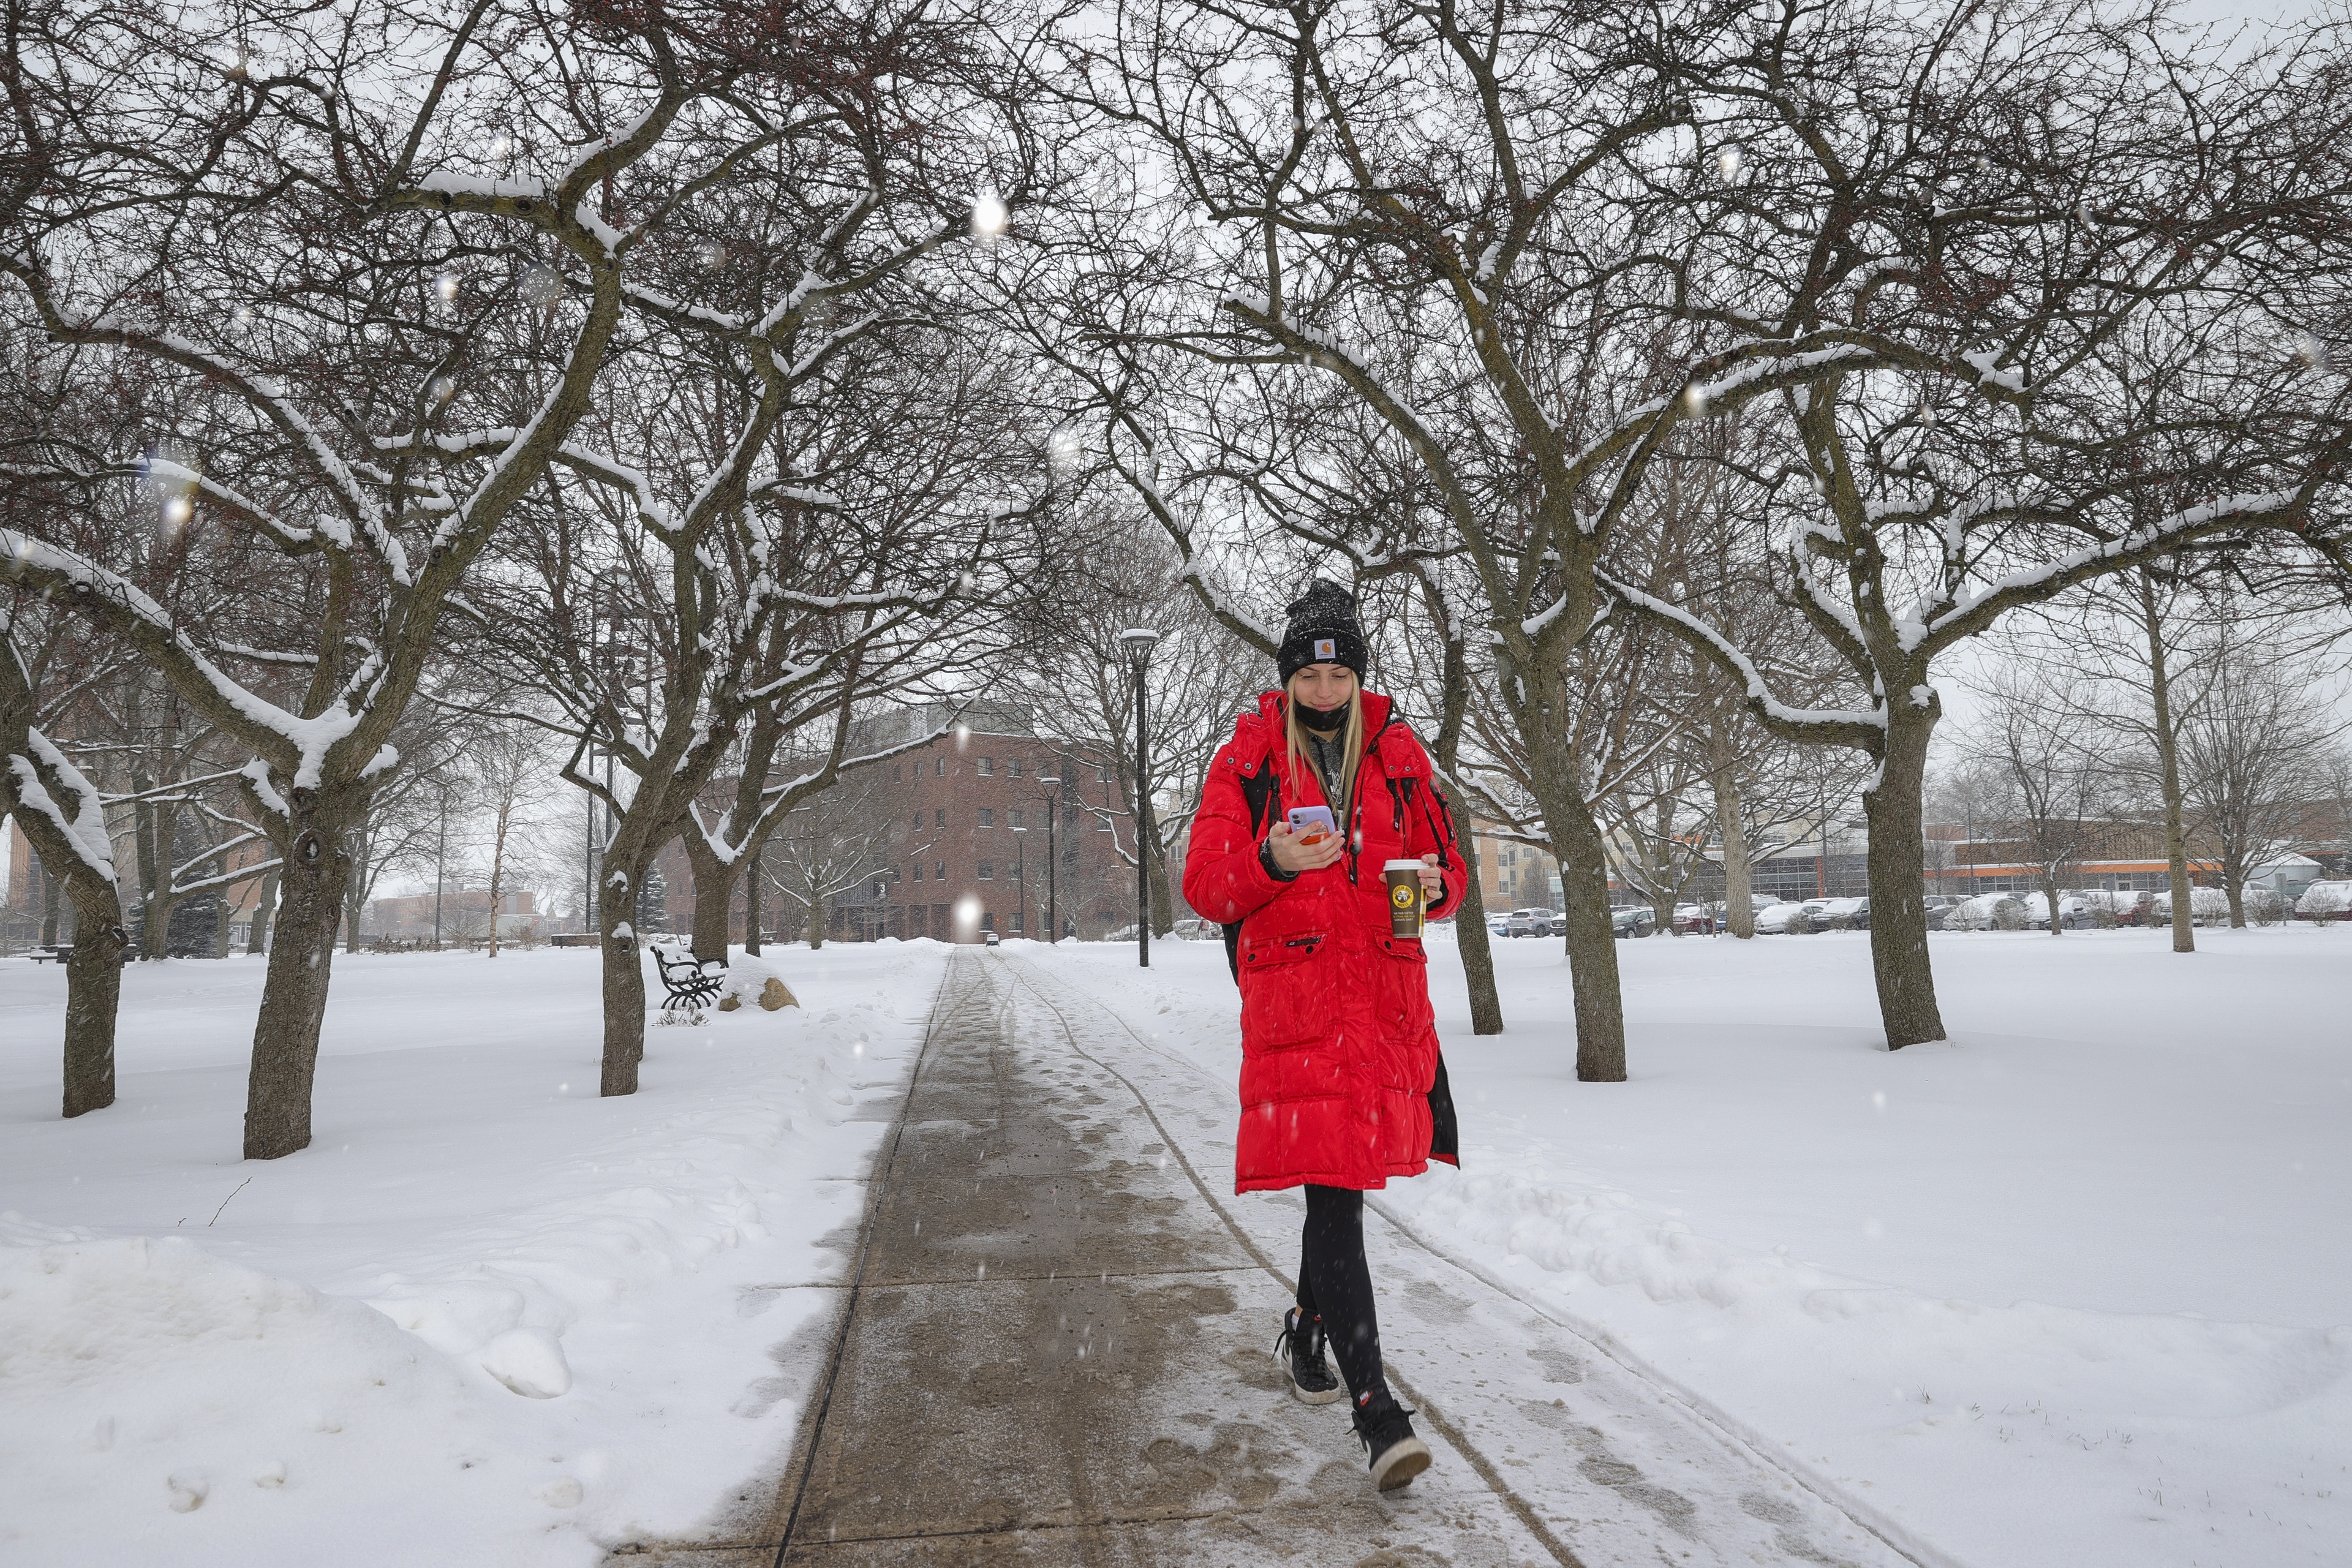 A student walking down a snowy path on campus while checking her phone